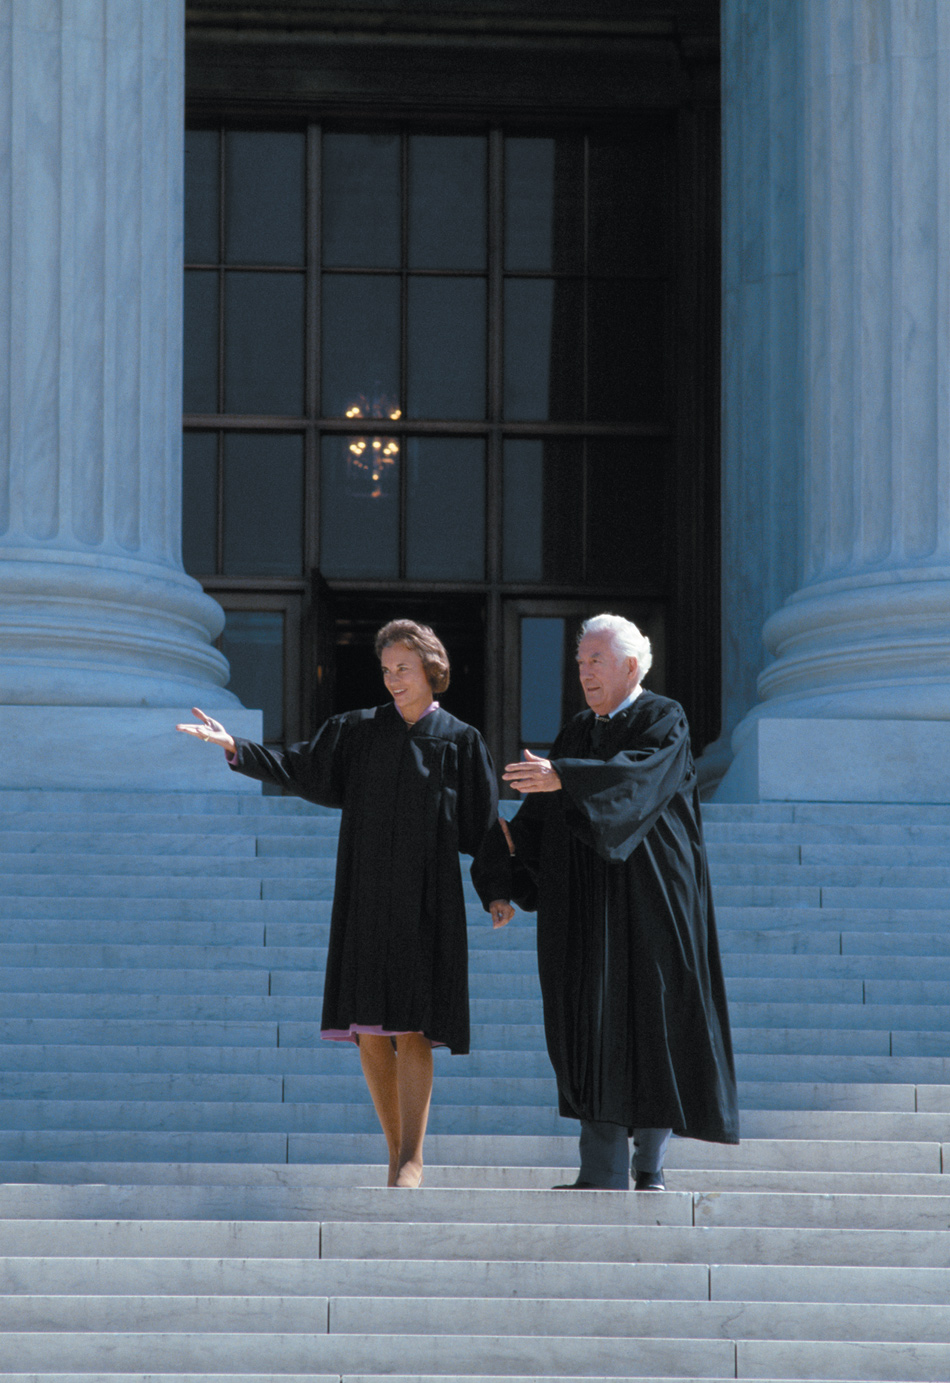 Chief Justice Warren Burger and newly appointed Justice Sandra Day O’Connor on the steps of the Supreme Court building, Washington, D.C., September 1981
